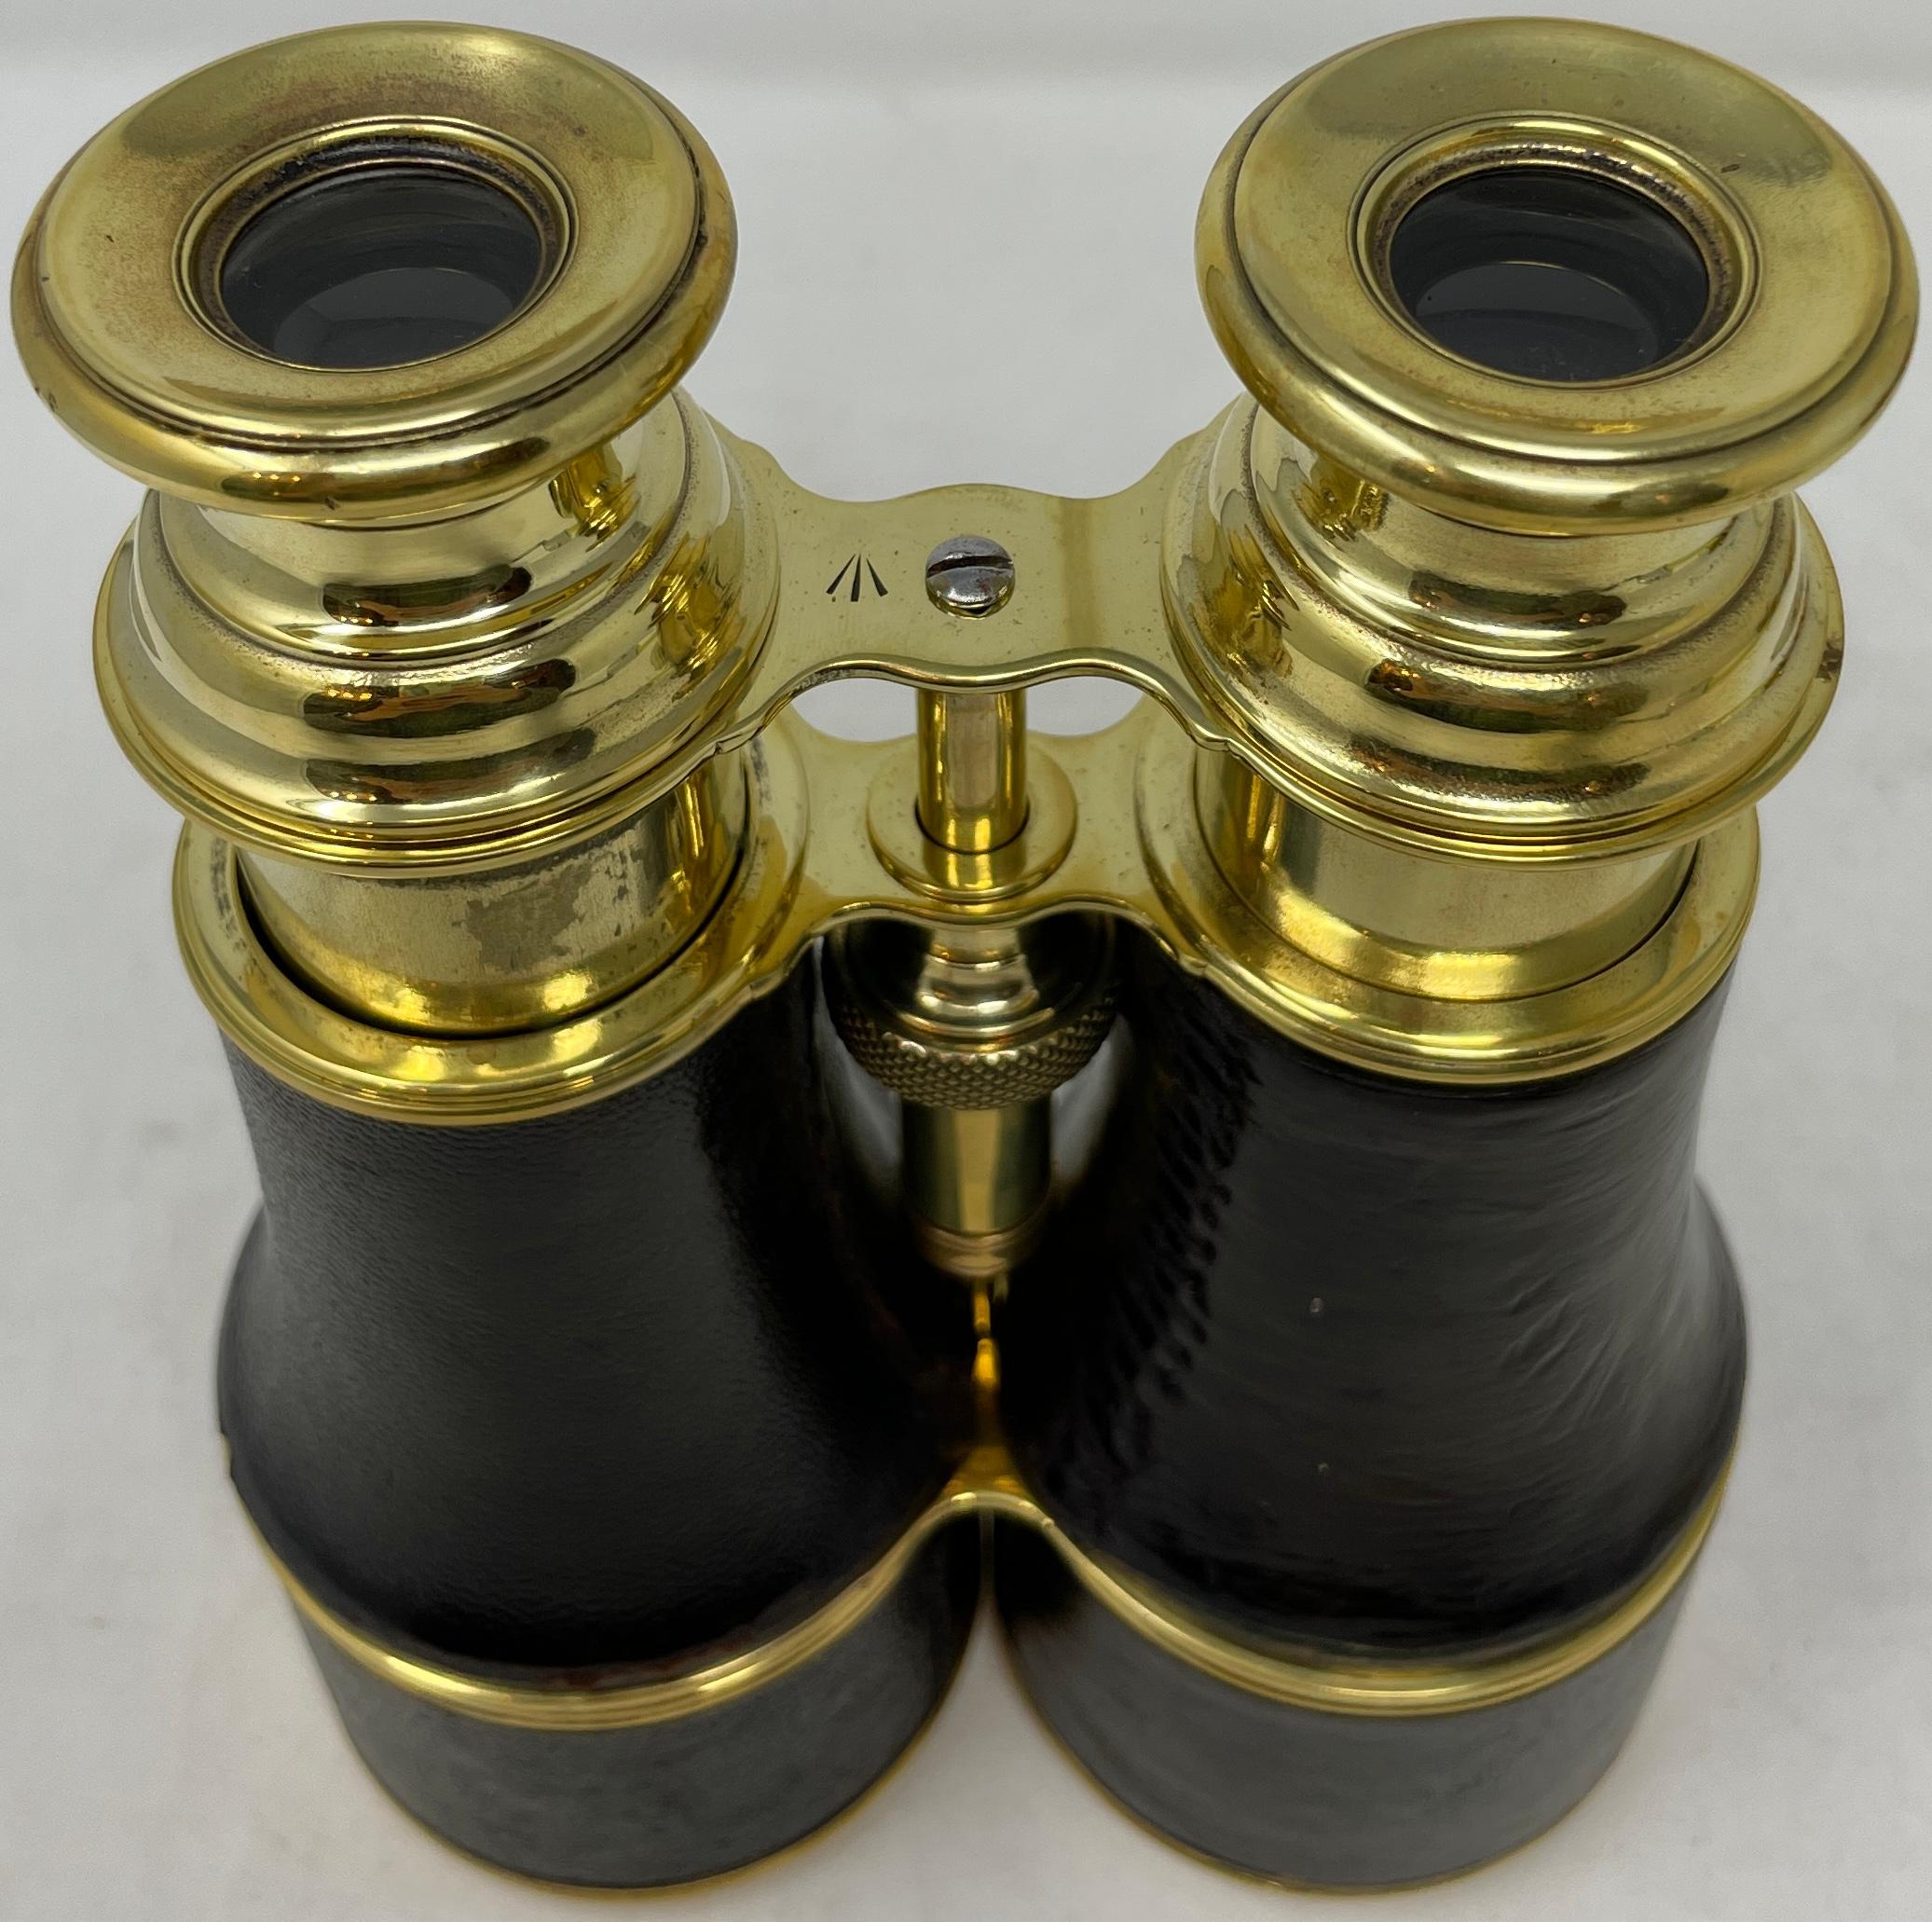 20th Century Antique English Binoculars with Leather Grips and Original Case, Circa 1910